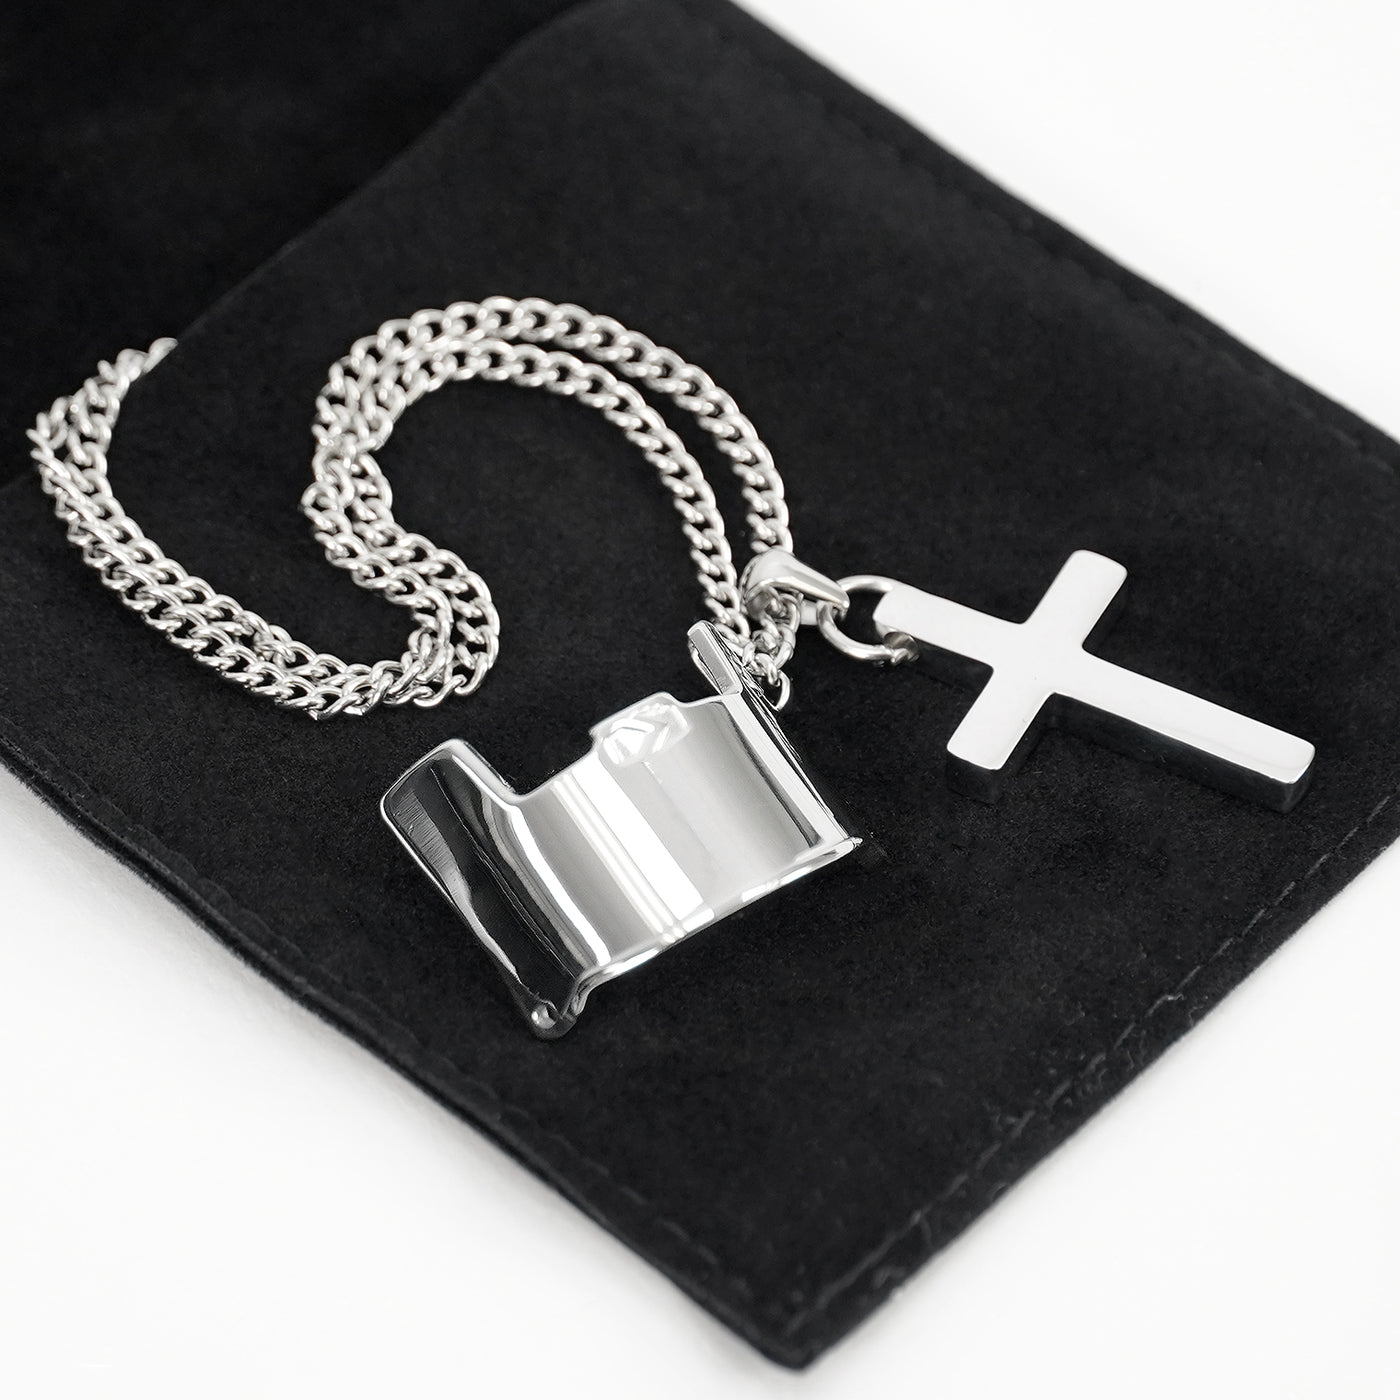 Visor & Cross Pendant with Chain Necklace - Stainless Steel